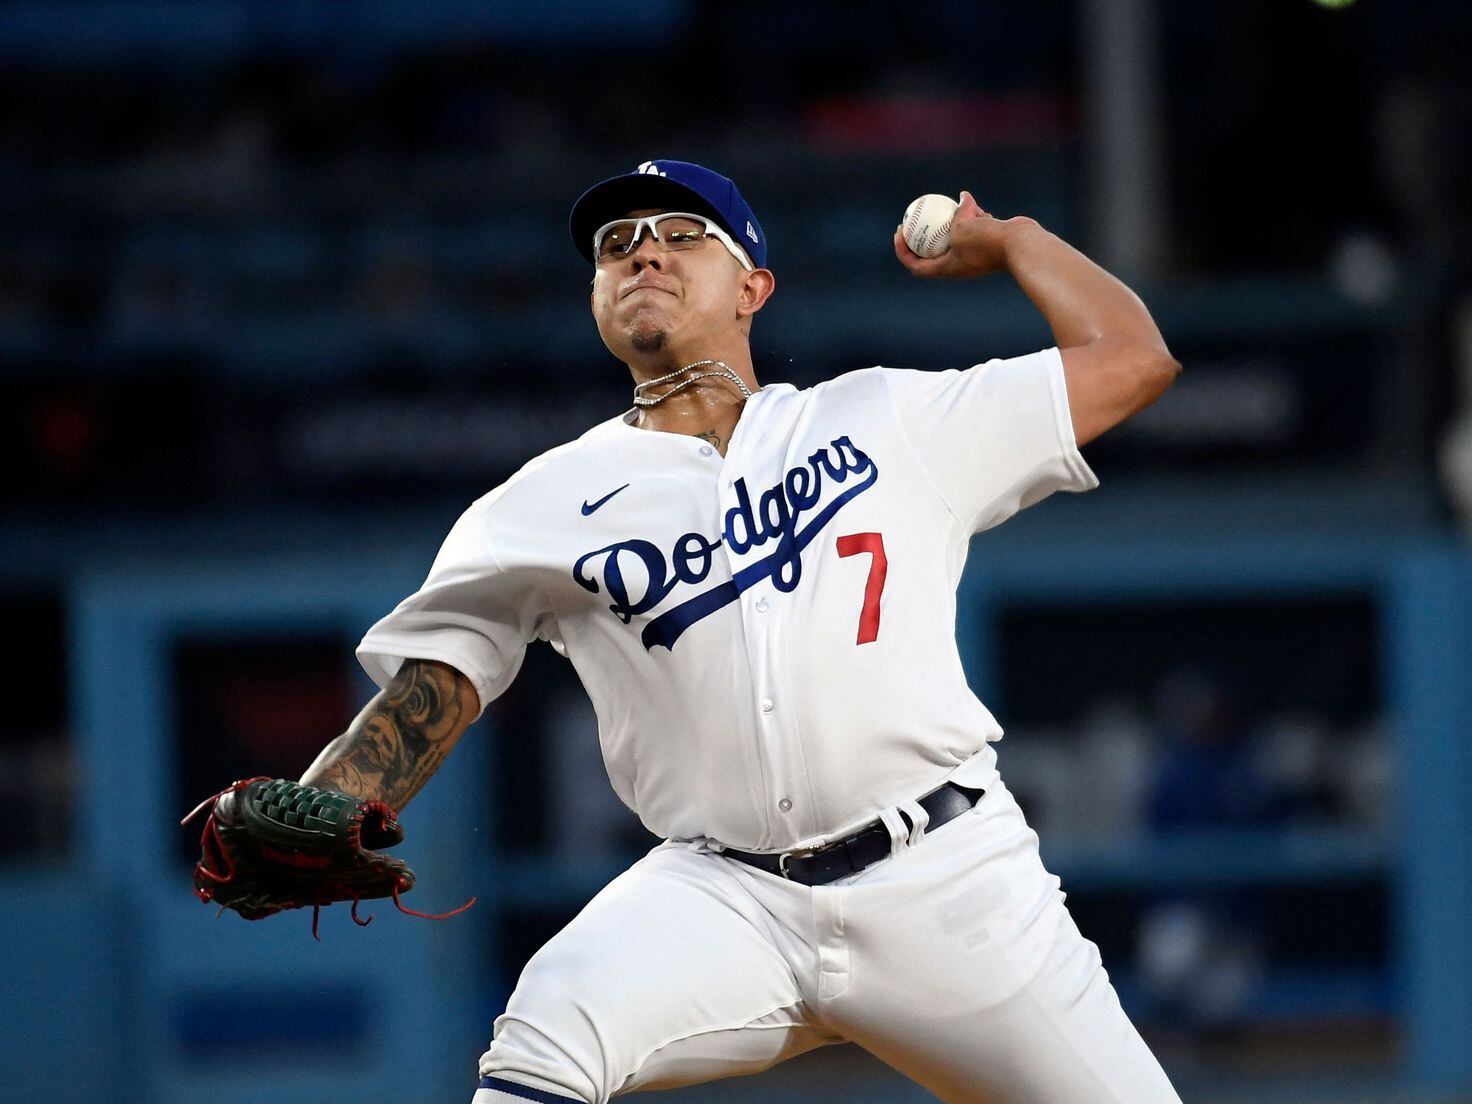 A career that began early is starting again for Julio Urias